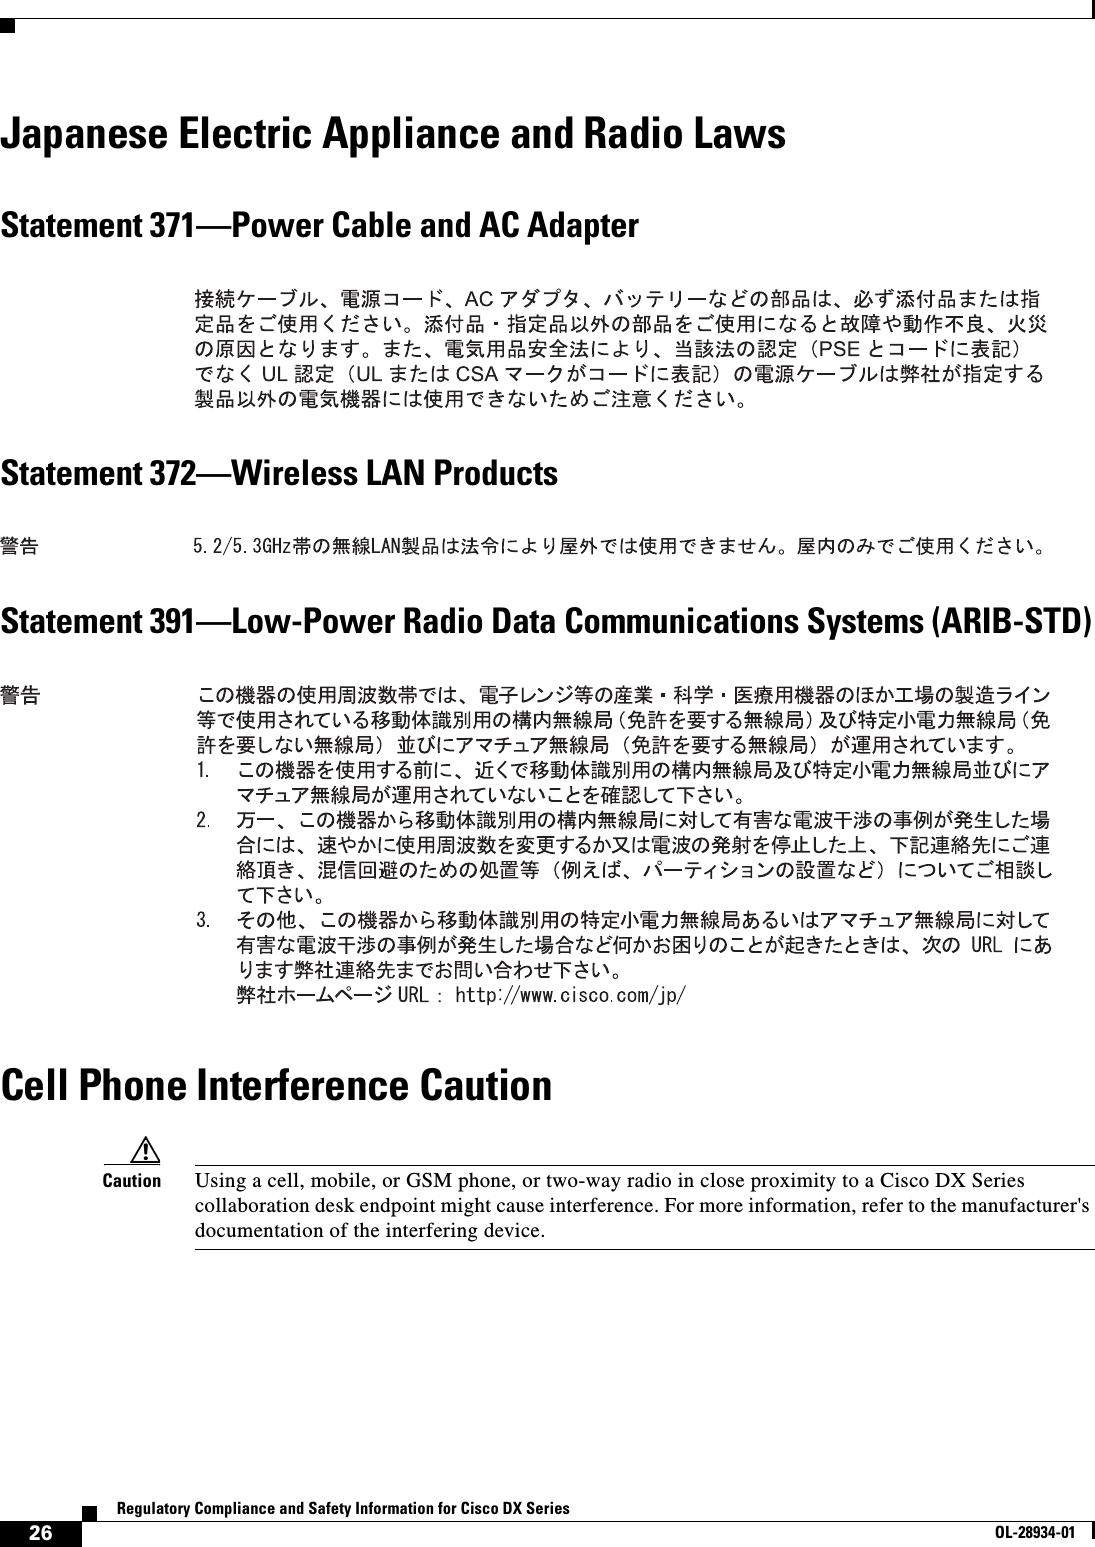  26Regulatory Compliance and Safety Information for Cisco DX SeriesOL-28934-01Japanese Electric Appliance and Radio LawsStatement 371—Power Cable and AC AdapterStatement 372—Wireless LAN ProductsStatement 391—Low-Power Radio Data Communications Systems (ARIB-STD)Cell Phone Interference CautionCaution Using a cell, mobile, or GSM phone, or two-way radio in close proximity to a Cisco DX Series collaboration desk endpoint might cause interference. For more information, refer to the manufacturer&apos;s documentation of the interfering device.